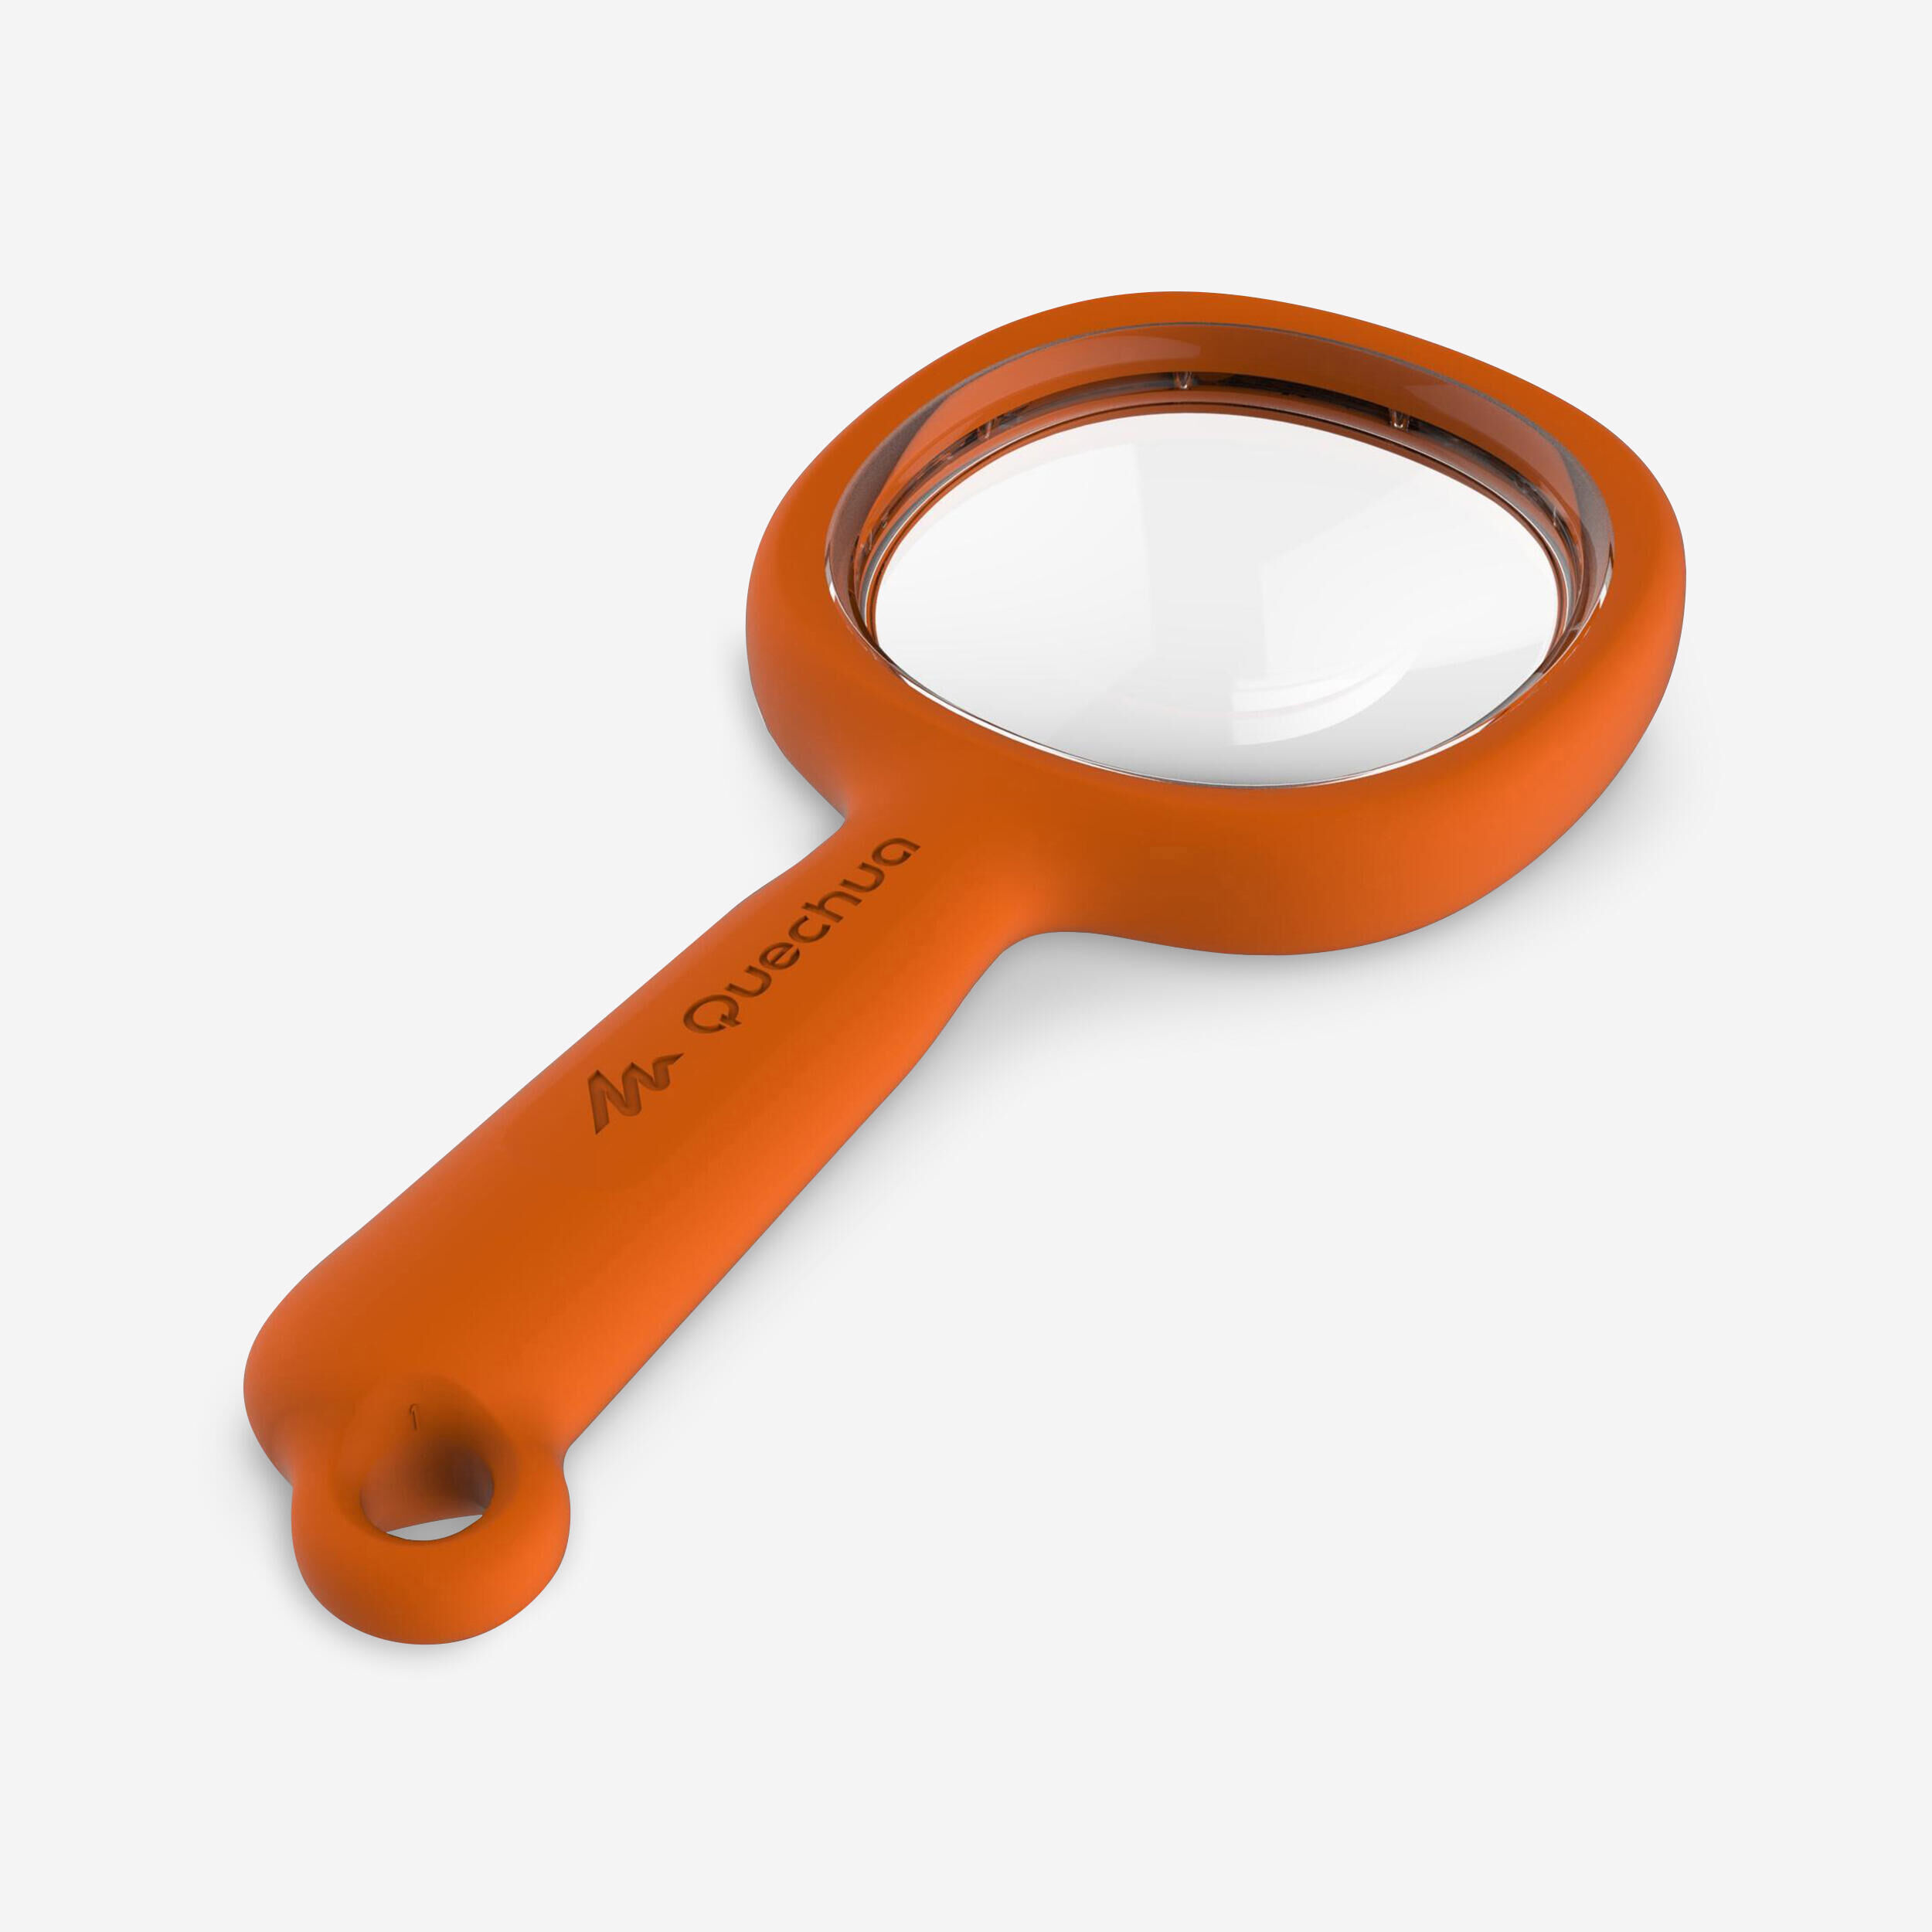 QUECHUA Kids' Hiking Magnifying Glass MH100 x3 magnification - Orange